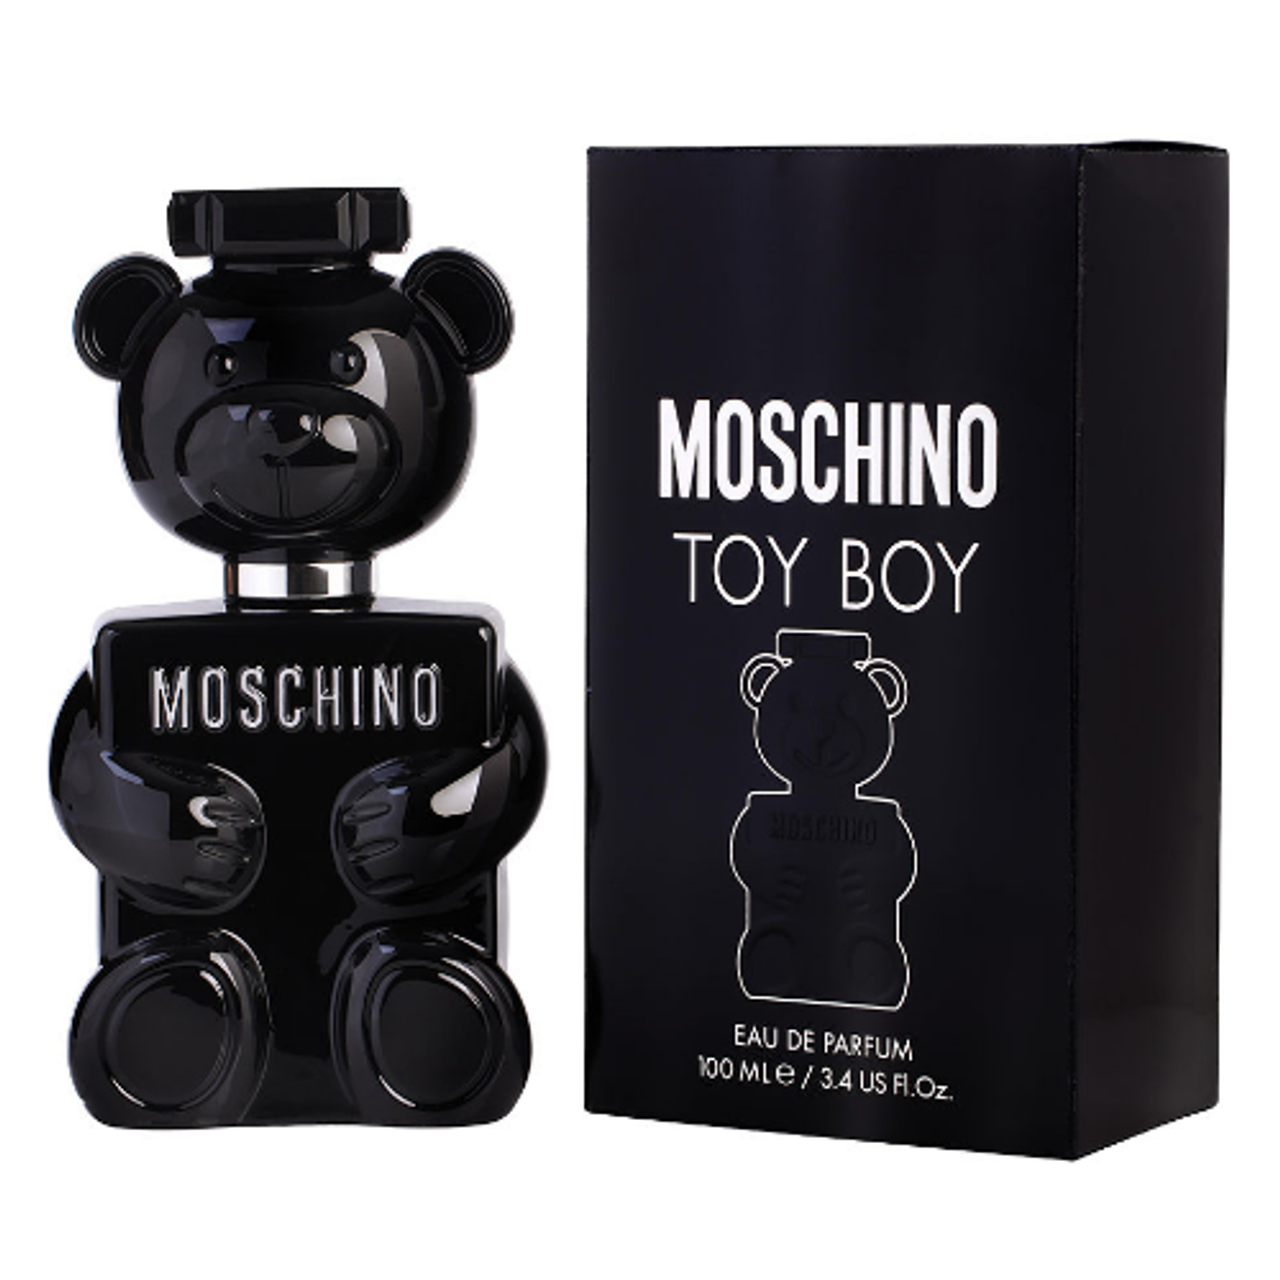 Moschino парфюмерная вода цена. Moschino Toy boy 100 ml. Moschino парфюмерная вода Toy boy. Moschino Bear parfume. Moschino Toy 2 Lady Tester 100ml EDP.